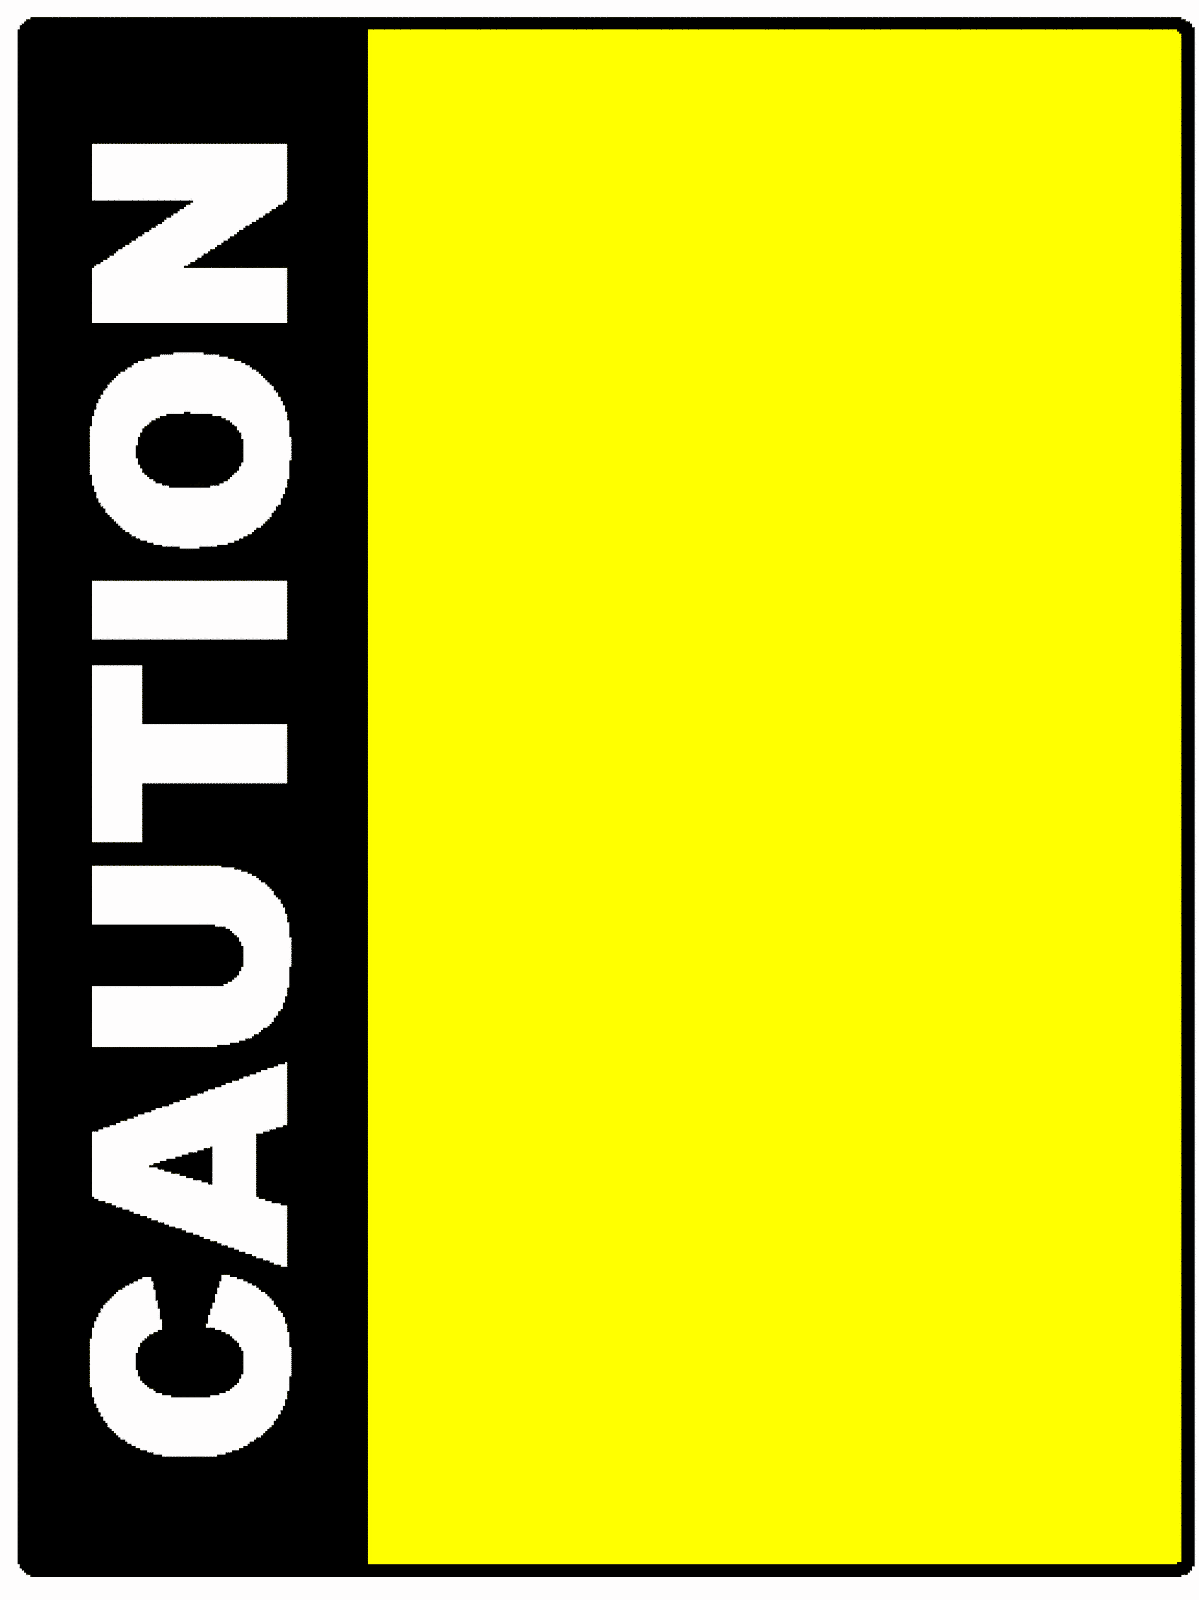 Free Caution Tape Border Download Free Caution Tape Border Png Images 